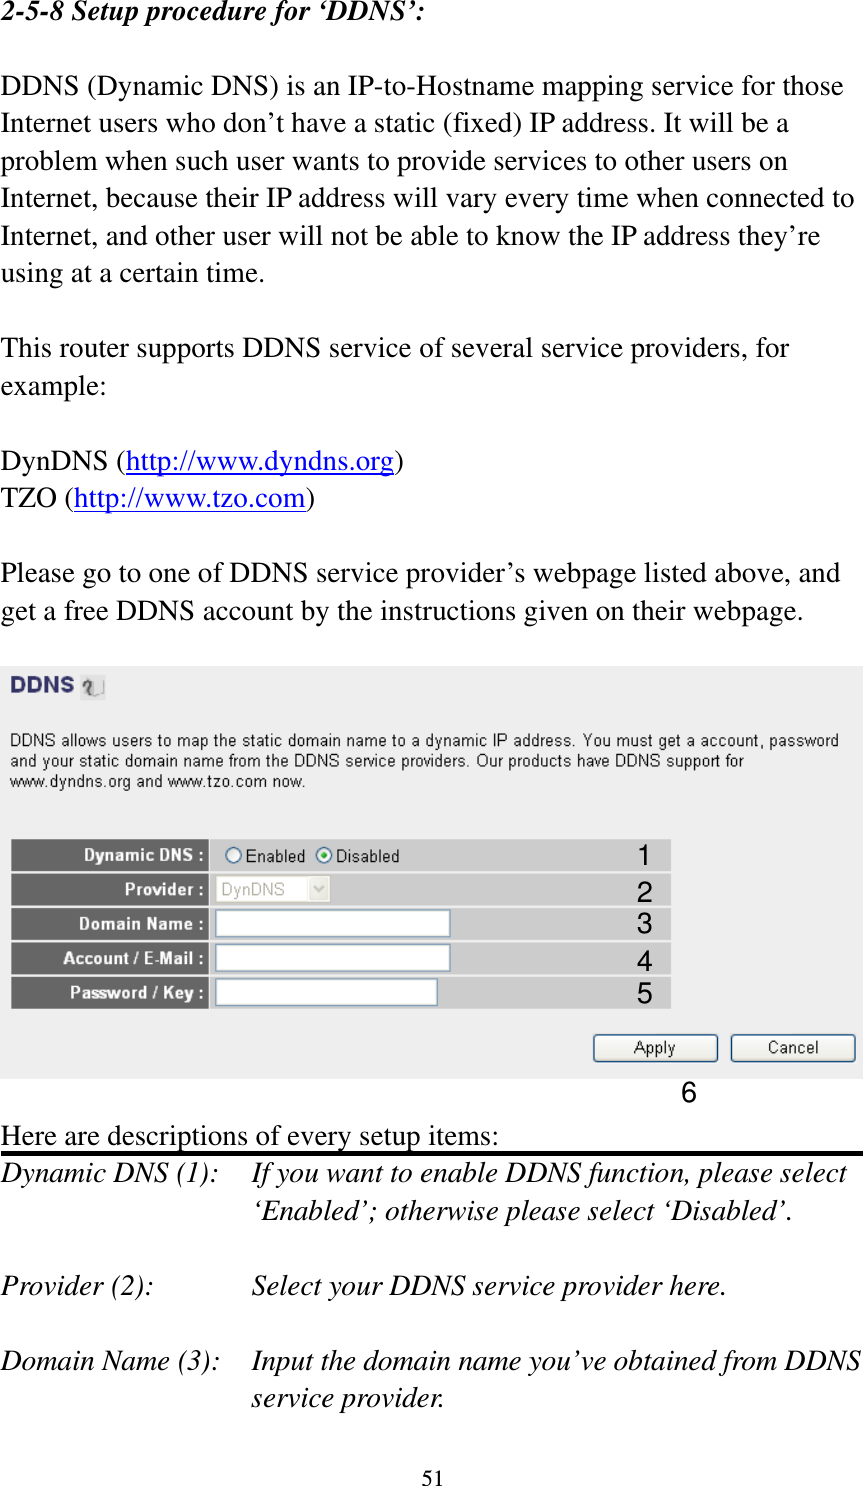 51 2-5-8 Setup procedure for ‘DDNS’:  DDNS (Dynamic DNS) is an IP-to-Hostname mapping service for those Internet users who don’t have a static (fixed) IP address. It will be a problem when such user wants to provide services to other users on Internet, because their IP address will vary every time when connected to Internet, and other user will not be able to know the IP address they’re using at a certain time.  This router supports DDNS service of several service providers, for example:  DynDNS (http://www.dyndns.org) TZO (http://www.tzo.com)  Please go to one of DDNS service provider’s webpage listed above, and get a free DDNS account by the instructions given on their webpage.    Here are descriptions of every setup items: Dynamic DNS (1):    If you want to enable DDNS function, please select ‘Enabled’; otherwise please select ‘Disabled’.  Provider (2):      Select your DDNS service provider here.  Domain Name (3):    Input the domain name you’ve obtained from DDNS service provider. 1 2345 6 